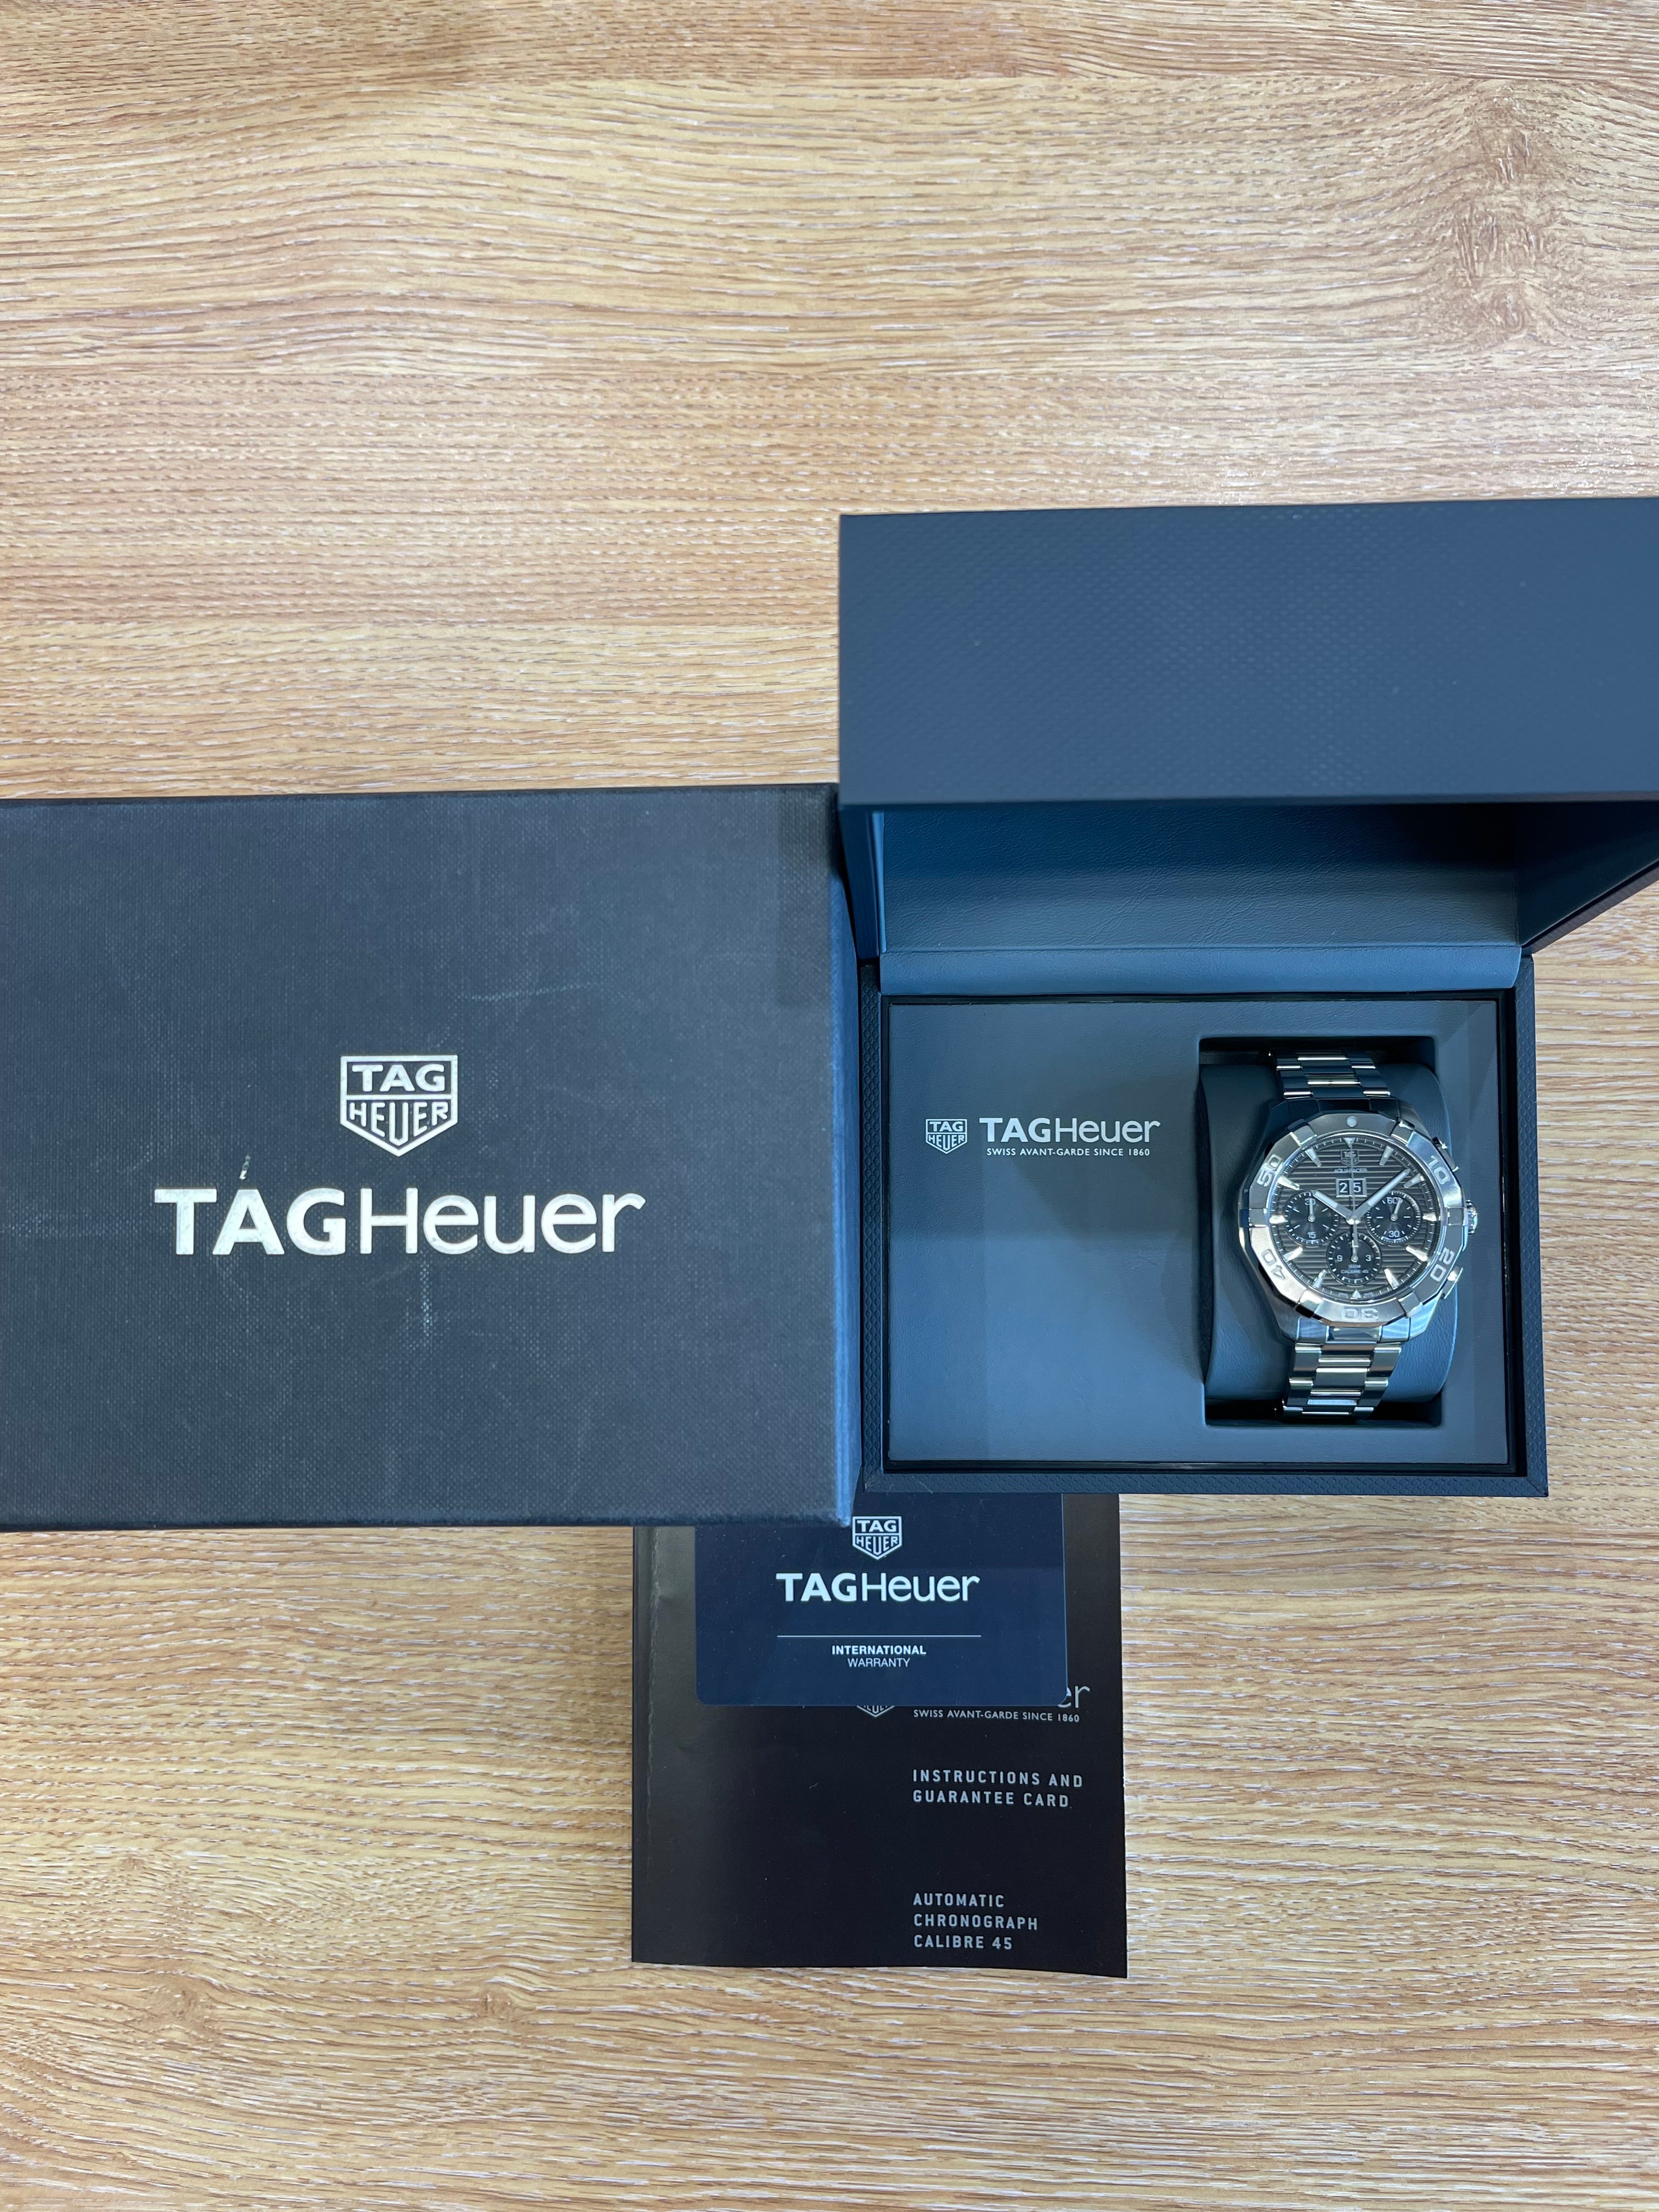 TAG HEUER Aquaracer Calibre 45 Chronograph Automatic Watch CAY211Z.BA0926 SOLD